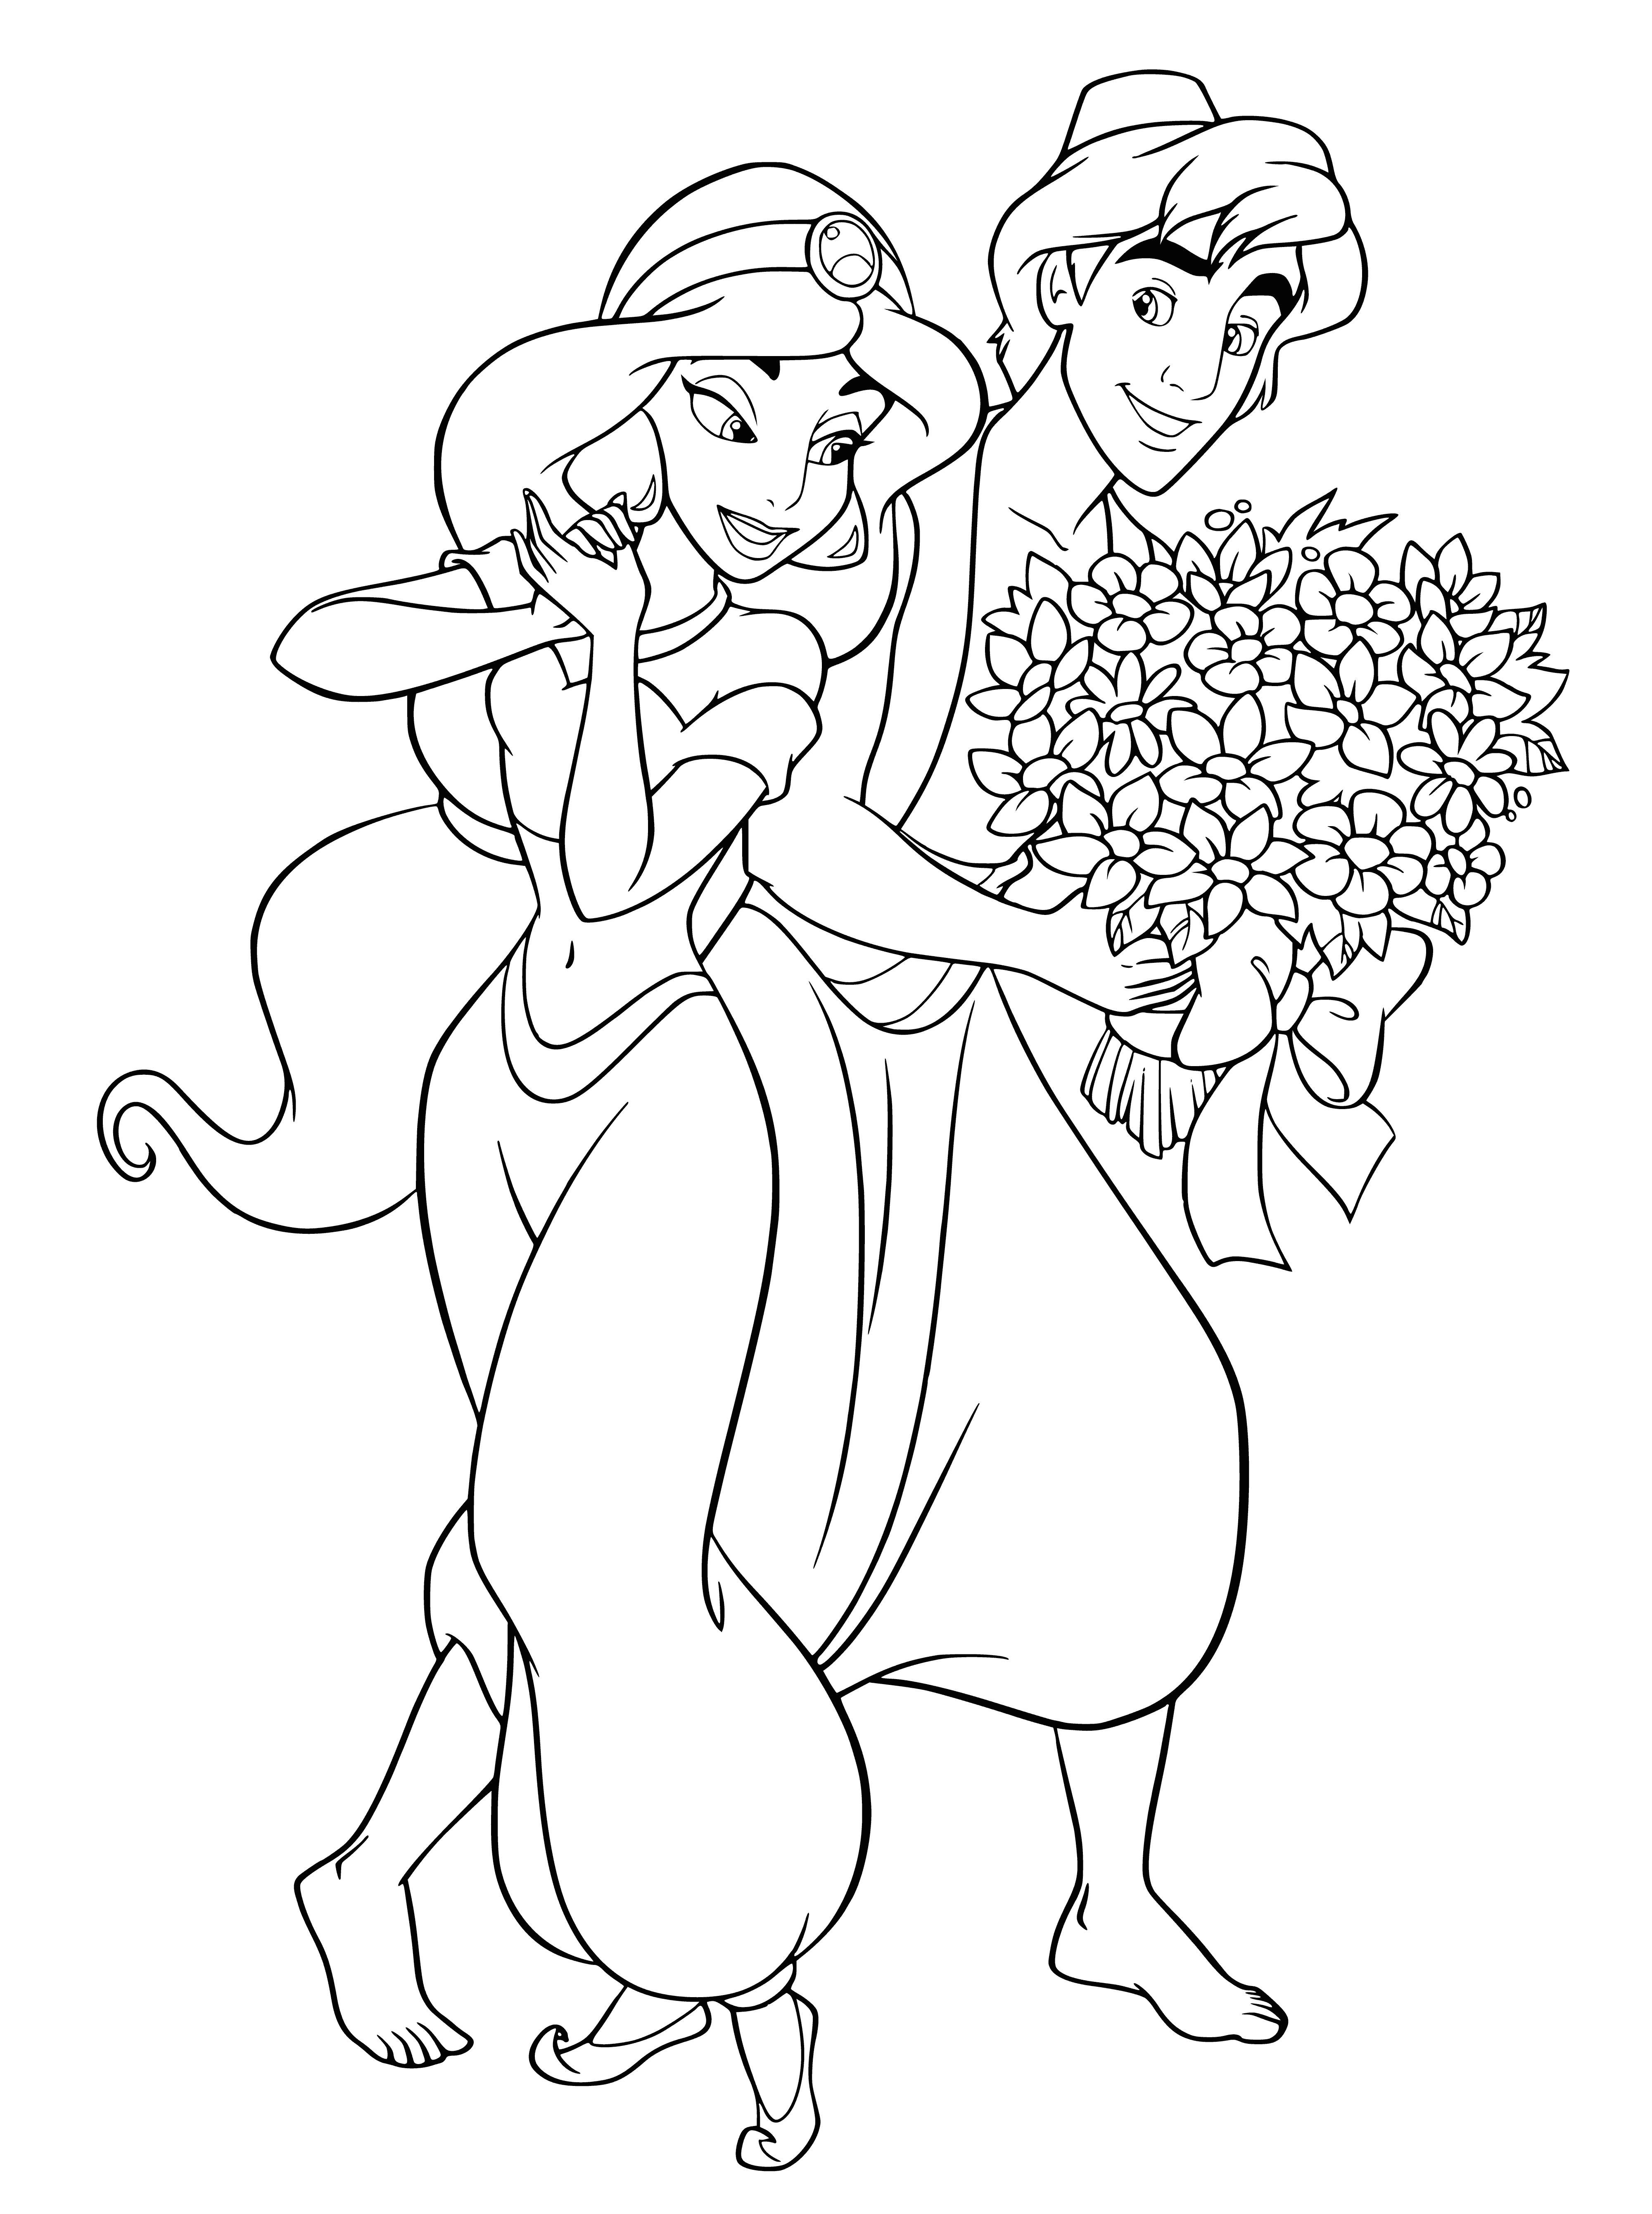 coloring page: Aladdin kneels before Jasmine, offering her a bouquet of flowers in a heartwarming scene.